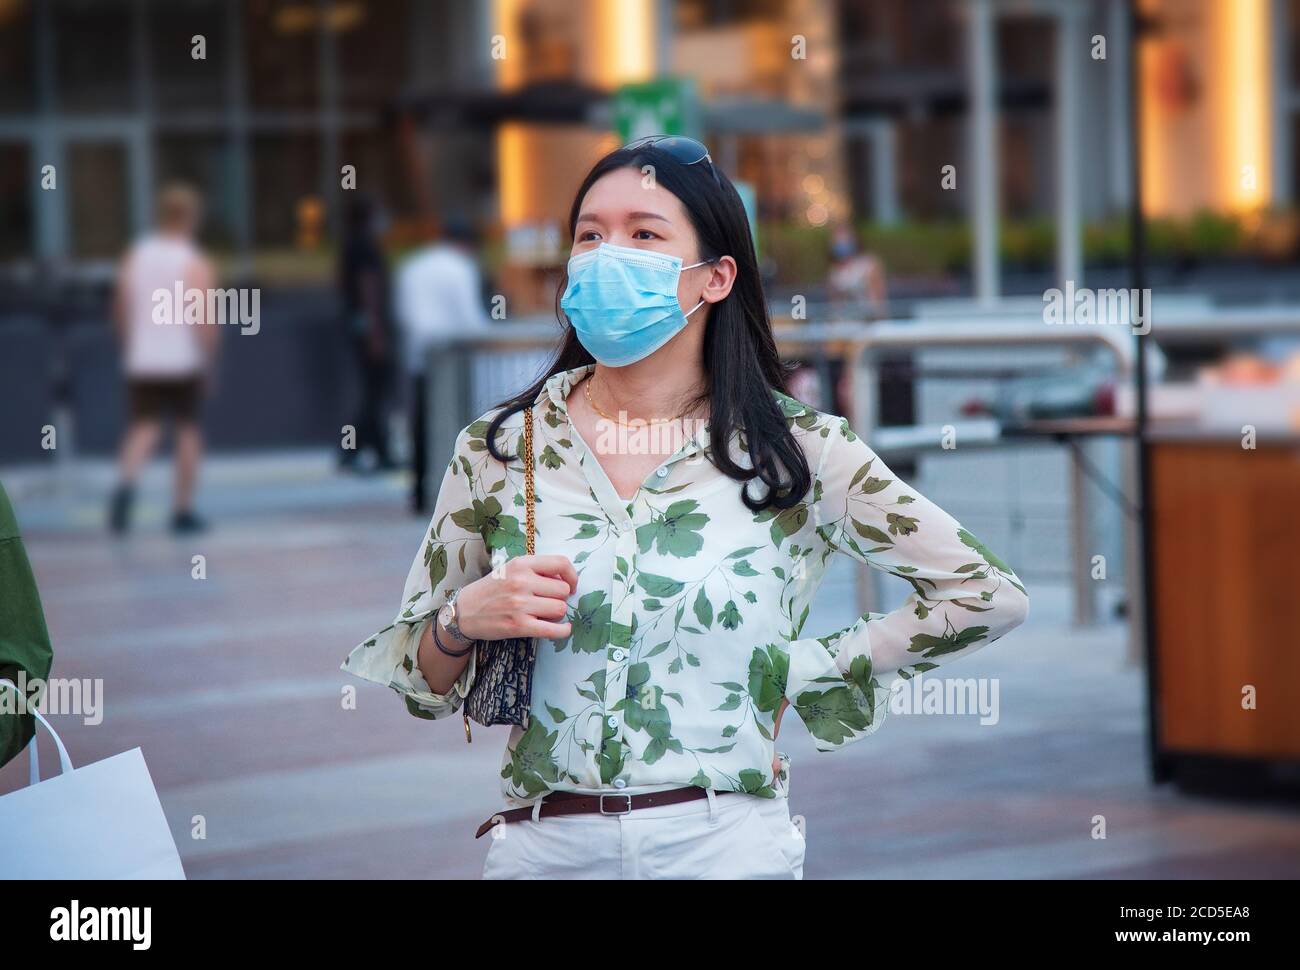 Asian woman wearing surgical face mask in outdoors area of a shopping mall in Dubai. Travel and leisure new normal after coronavirus Covid-19 pandemic Stock Photo